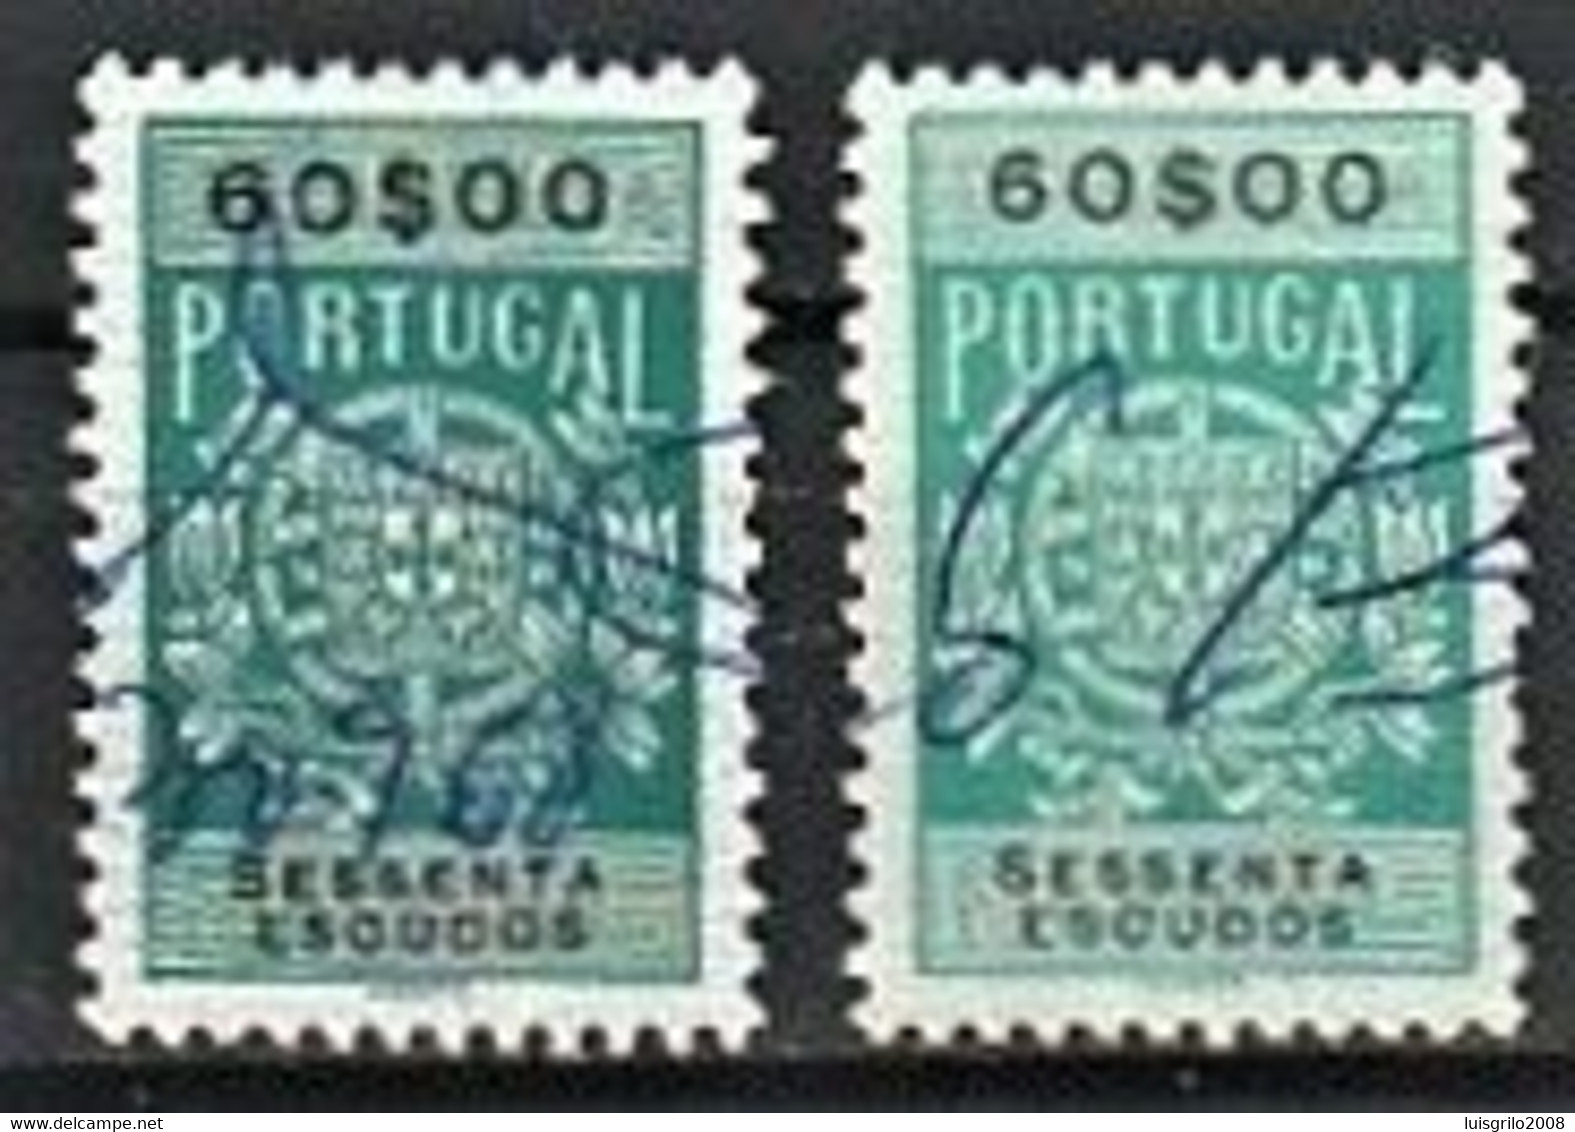 Fiscal/ Revenue, Portugal 1940 - Estampilha Fiscal -|- 60$00 - COLOR VARIANT - Is The Stamp Of The Right - Oblitérés